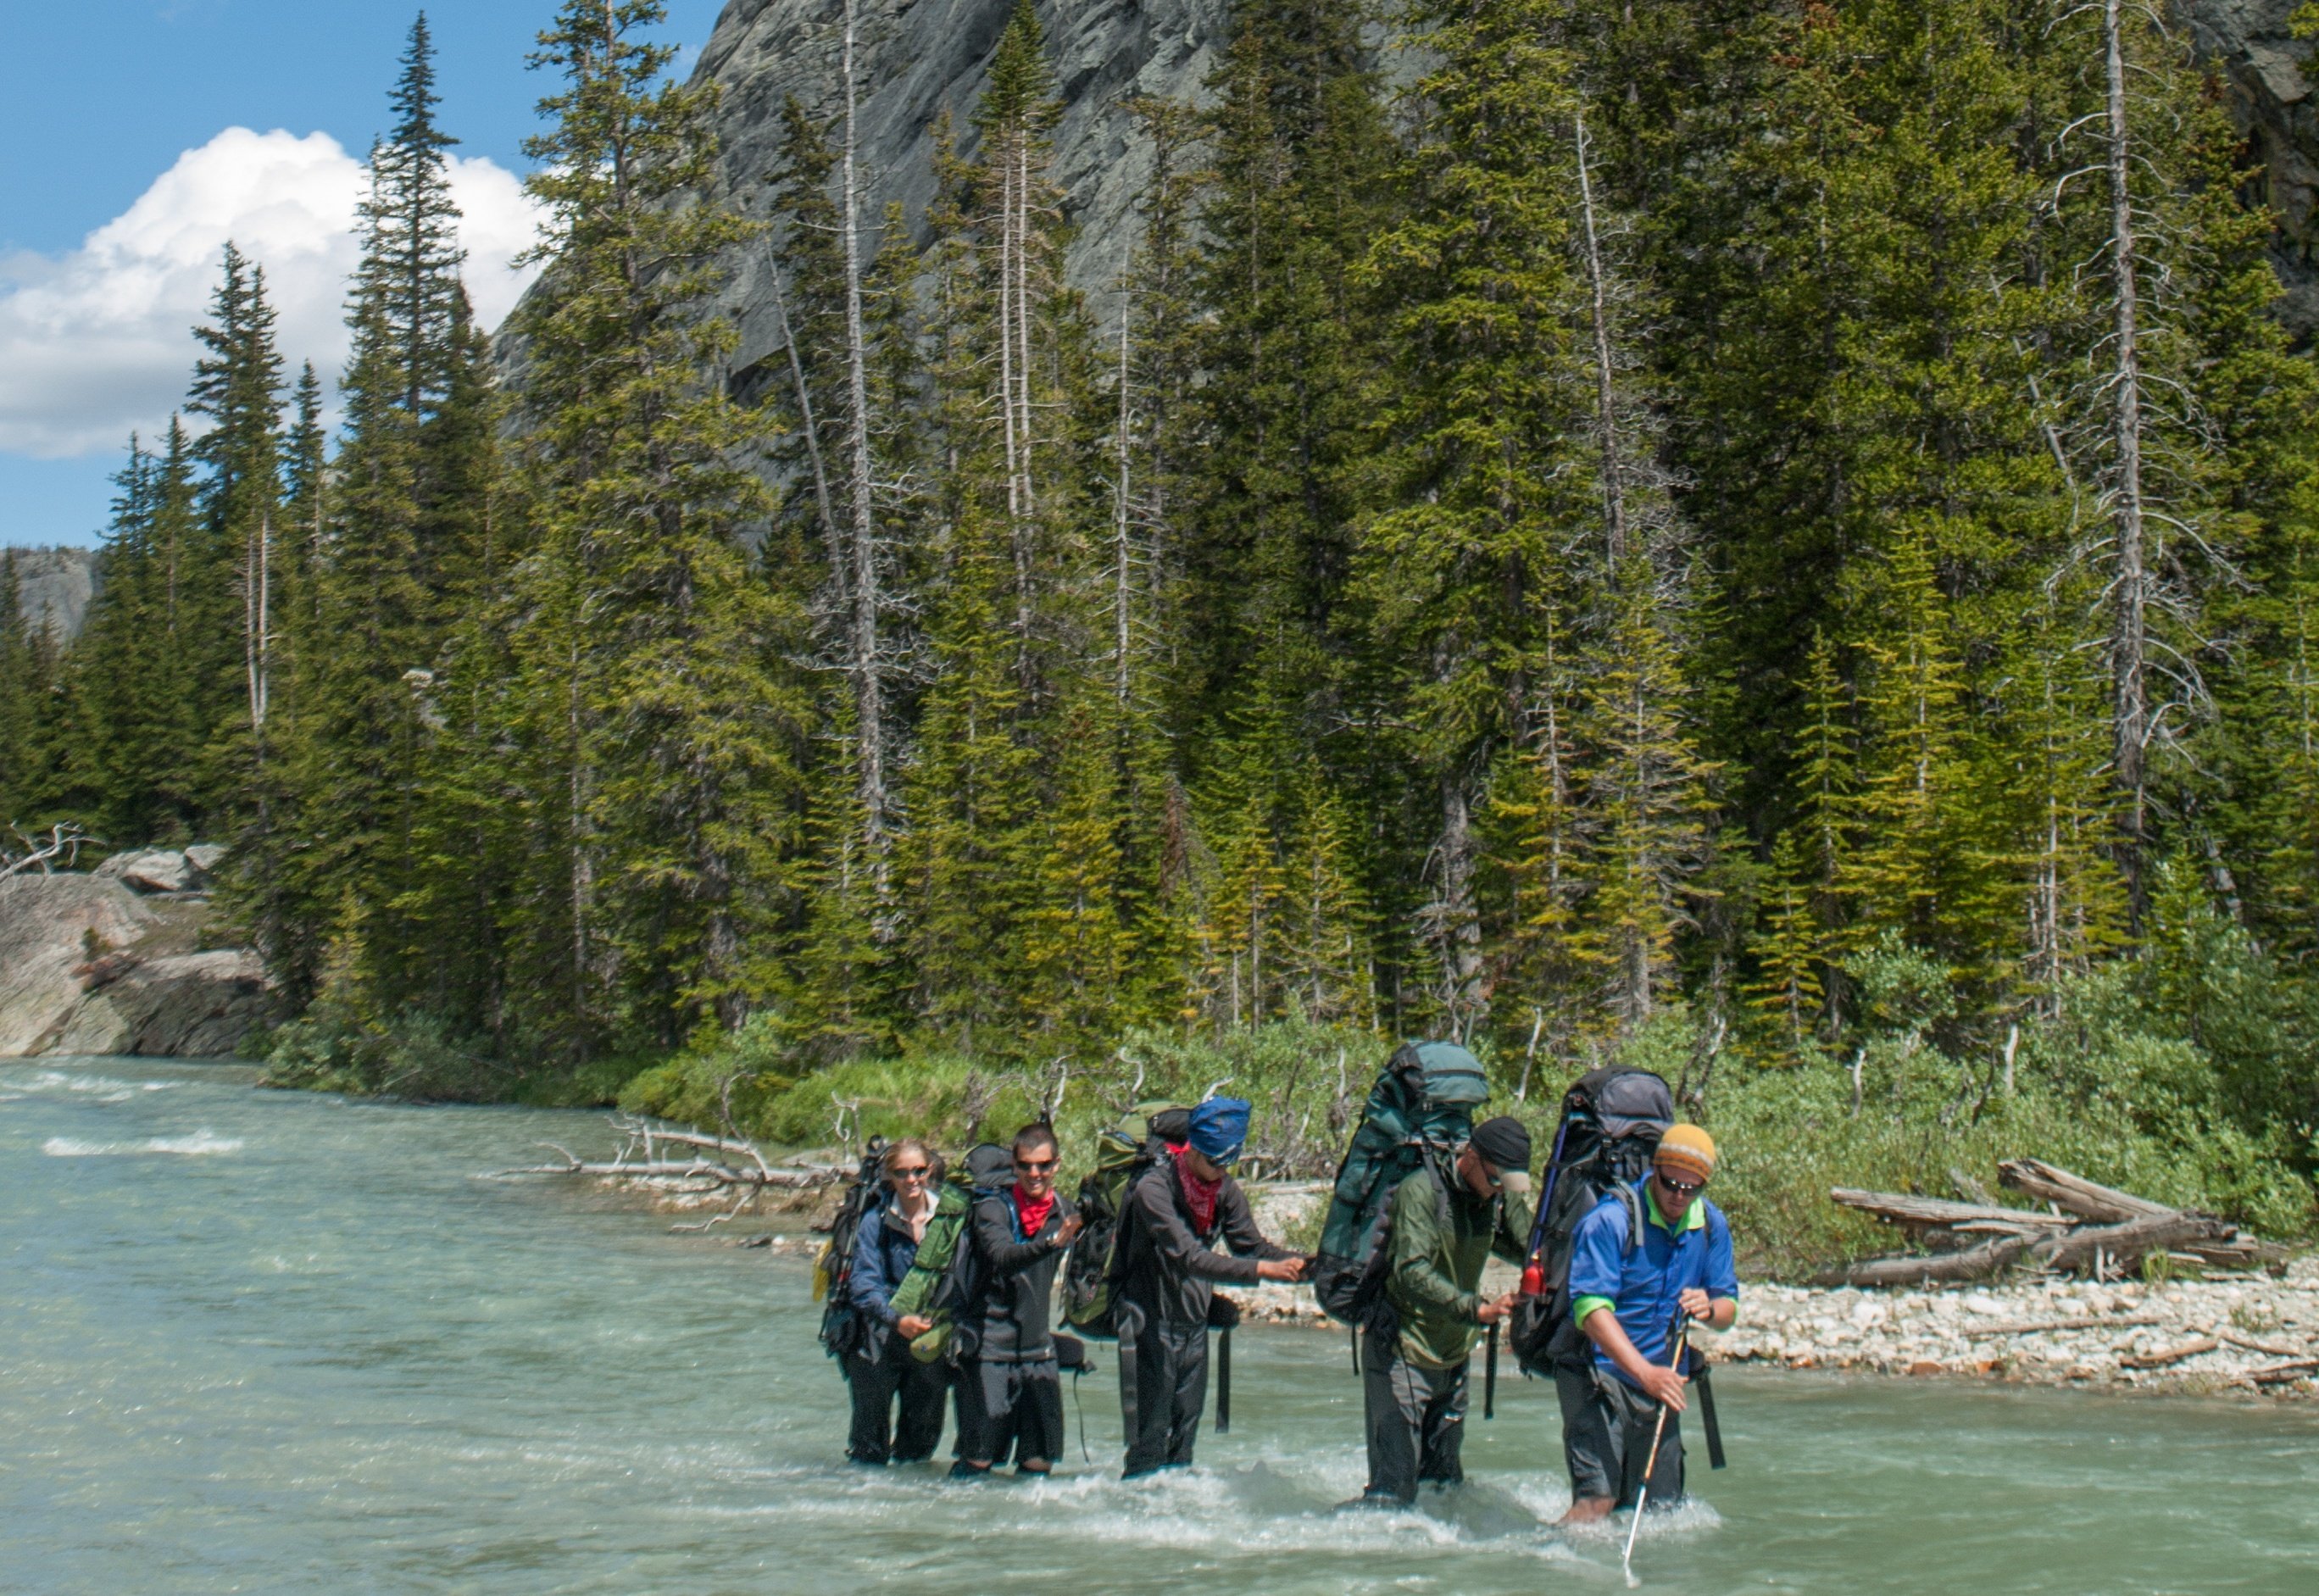 Five people wearing backpacks cross a river with pine trees on the riverbank